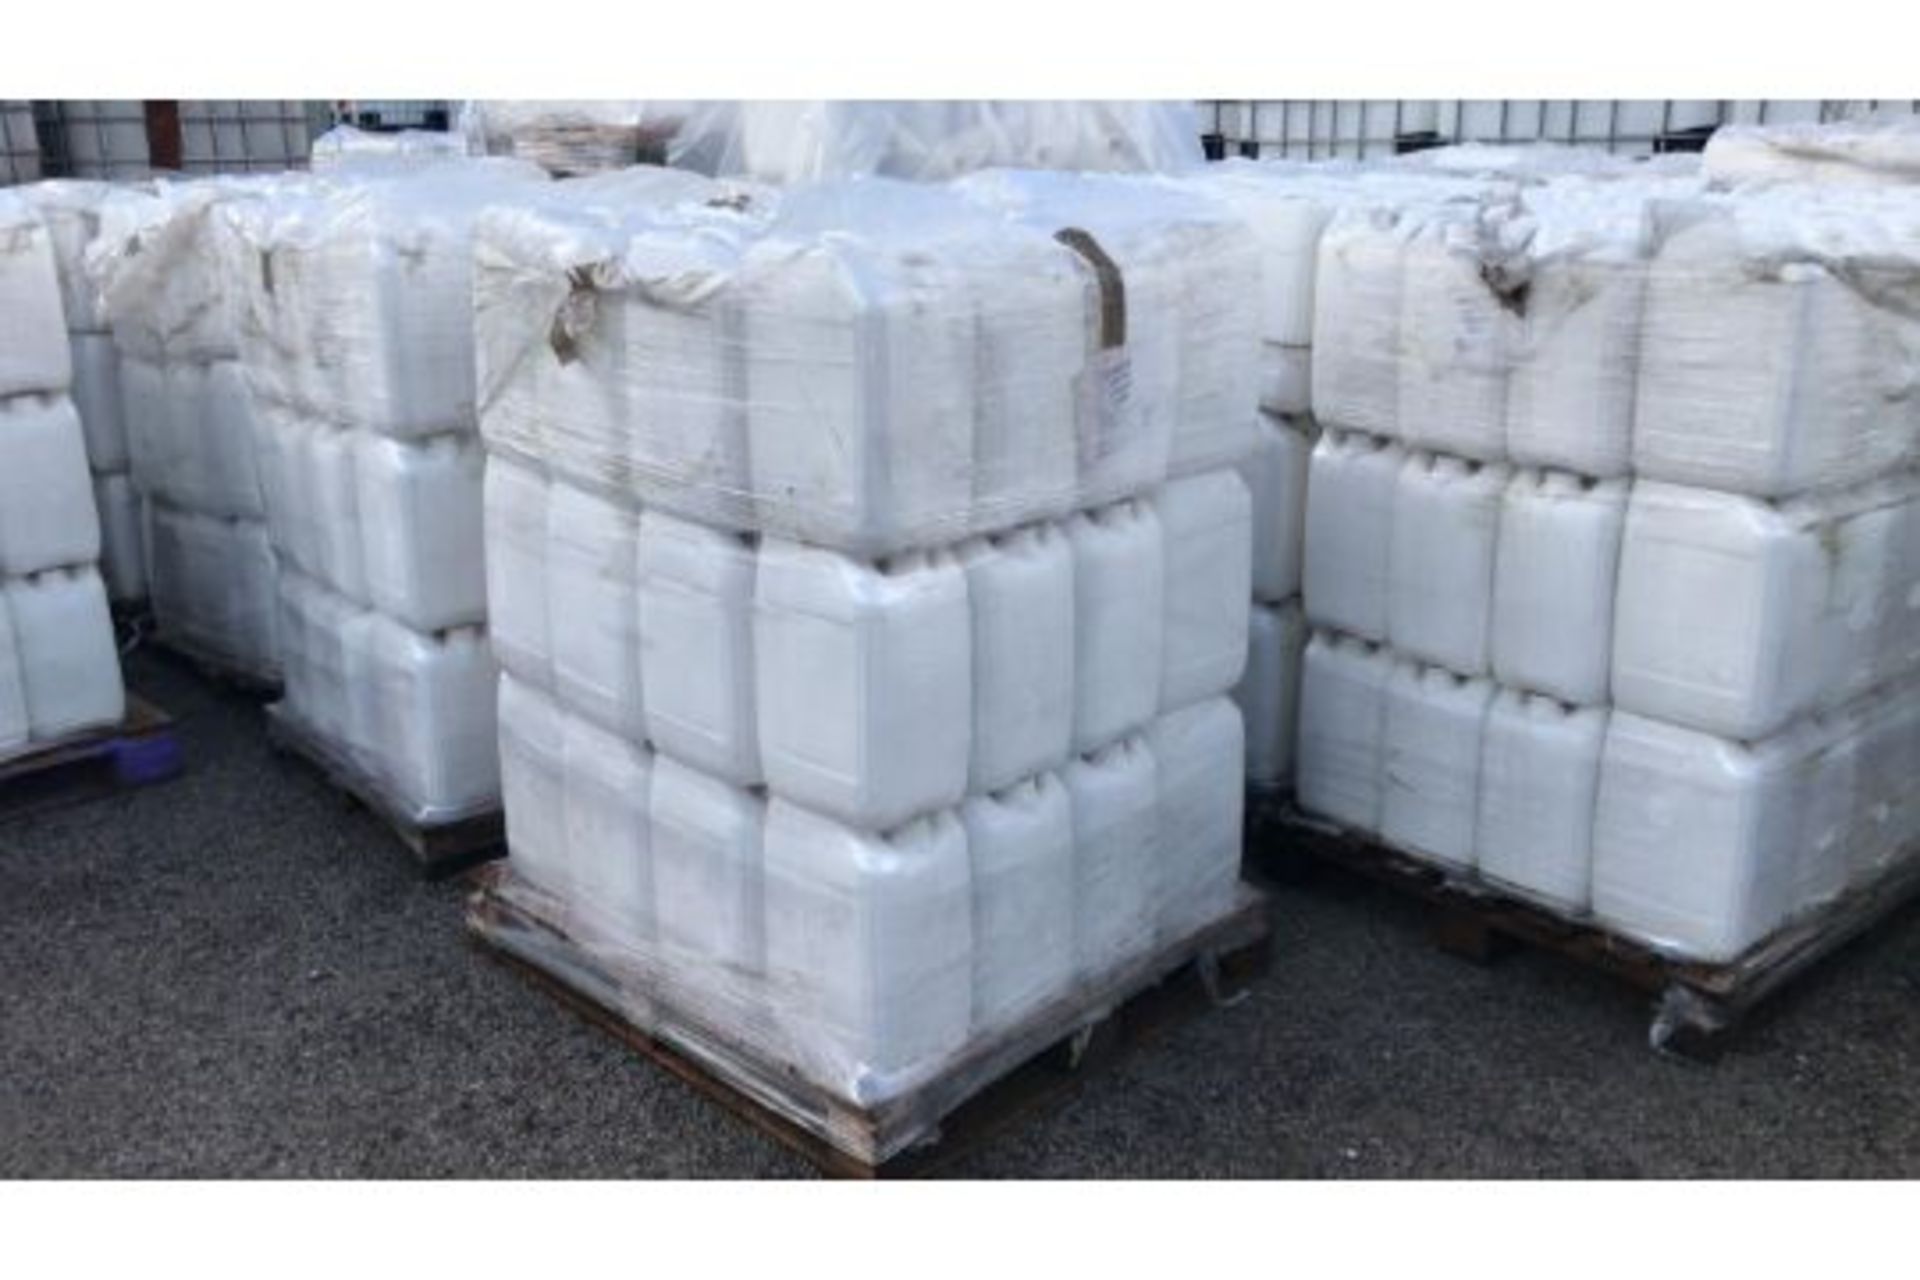 4x Pallets of 20ltr White Plastic Containers